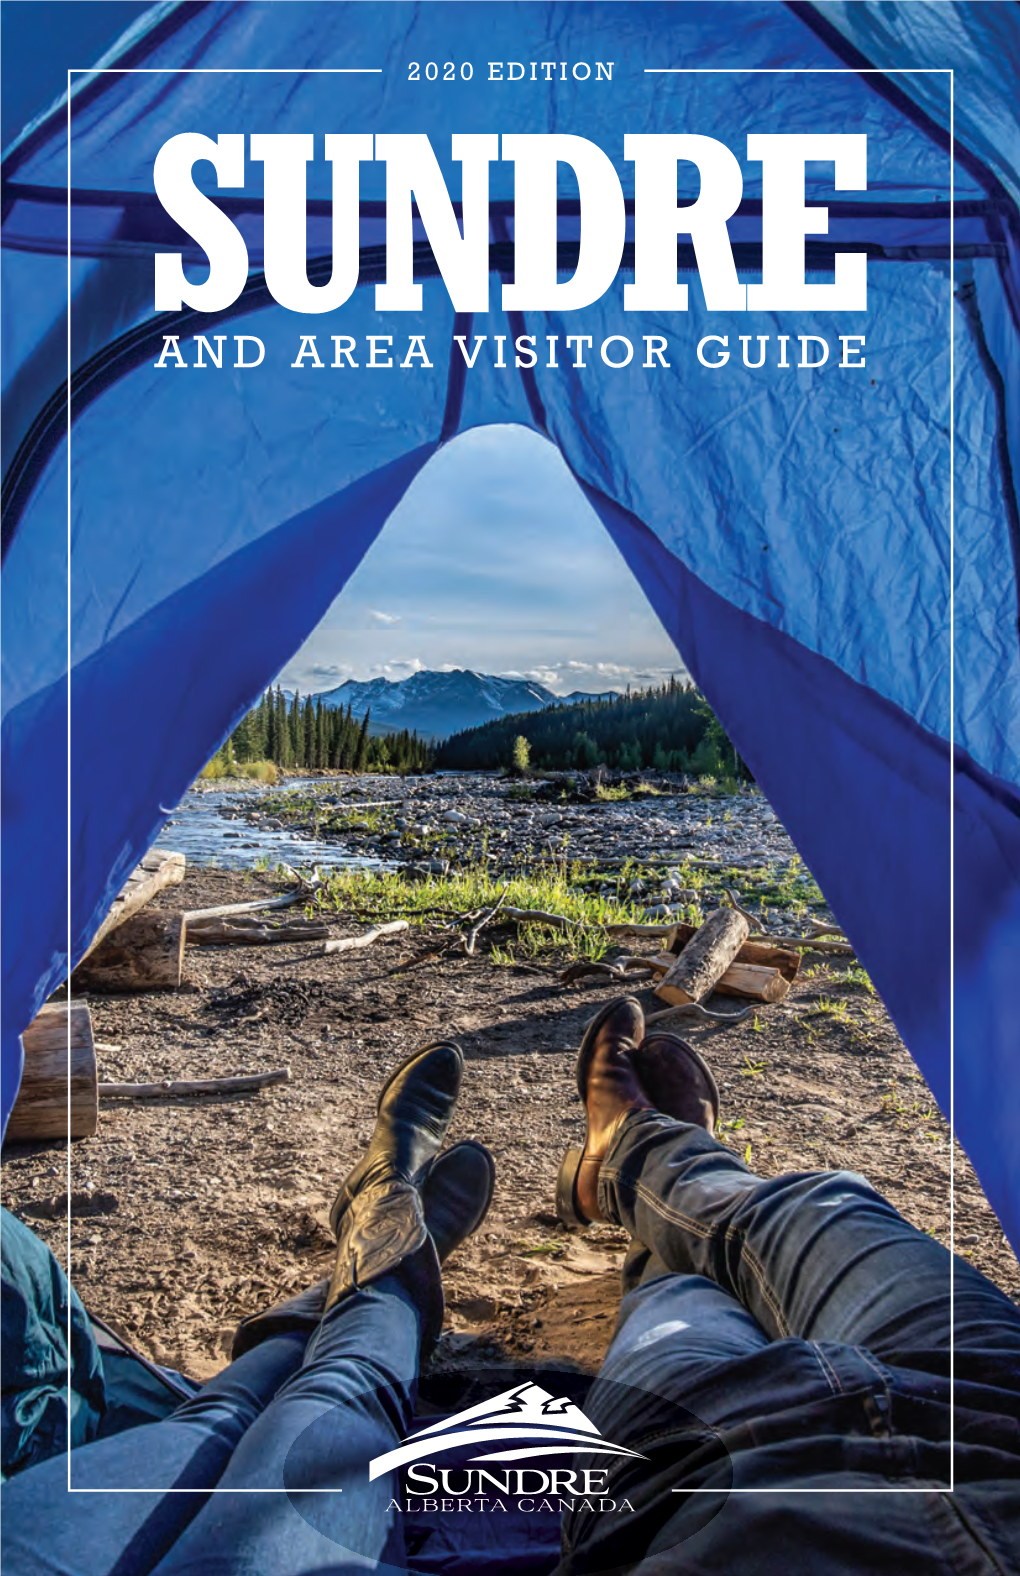 And Area Visitor Guide